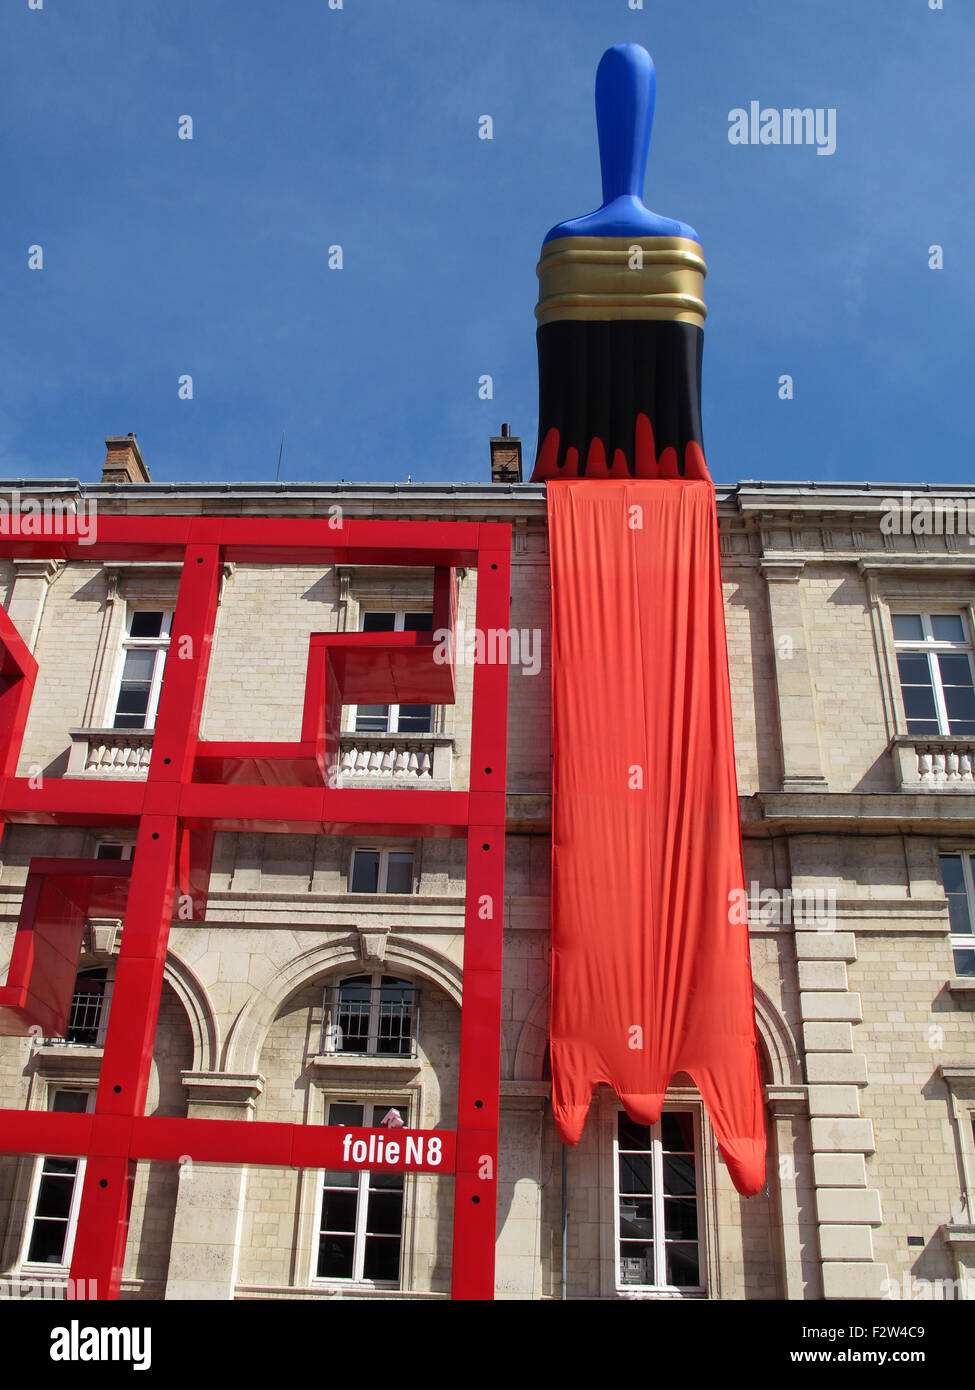 Paint The Town Red-2013 by Filthy Luker-Pedro Estrellas/Desing In Air,Great Britain,L'Air des Geants,The Giants Air,exhibition Stock Photo